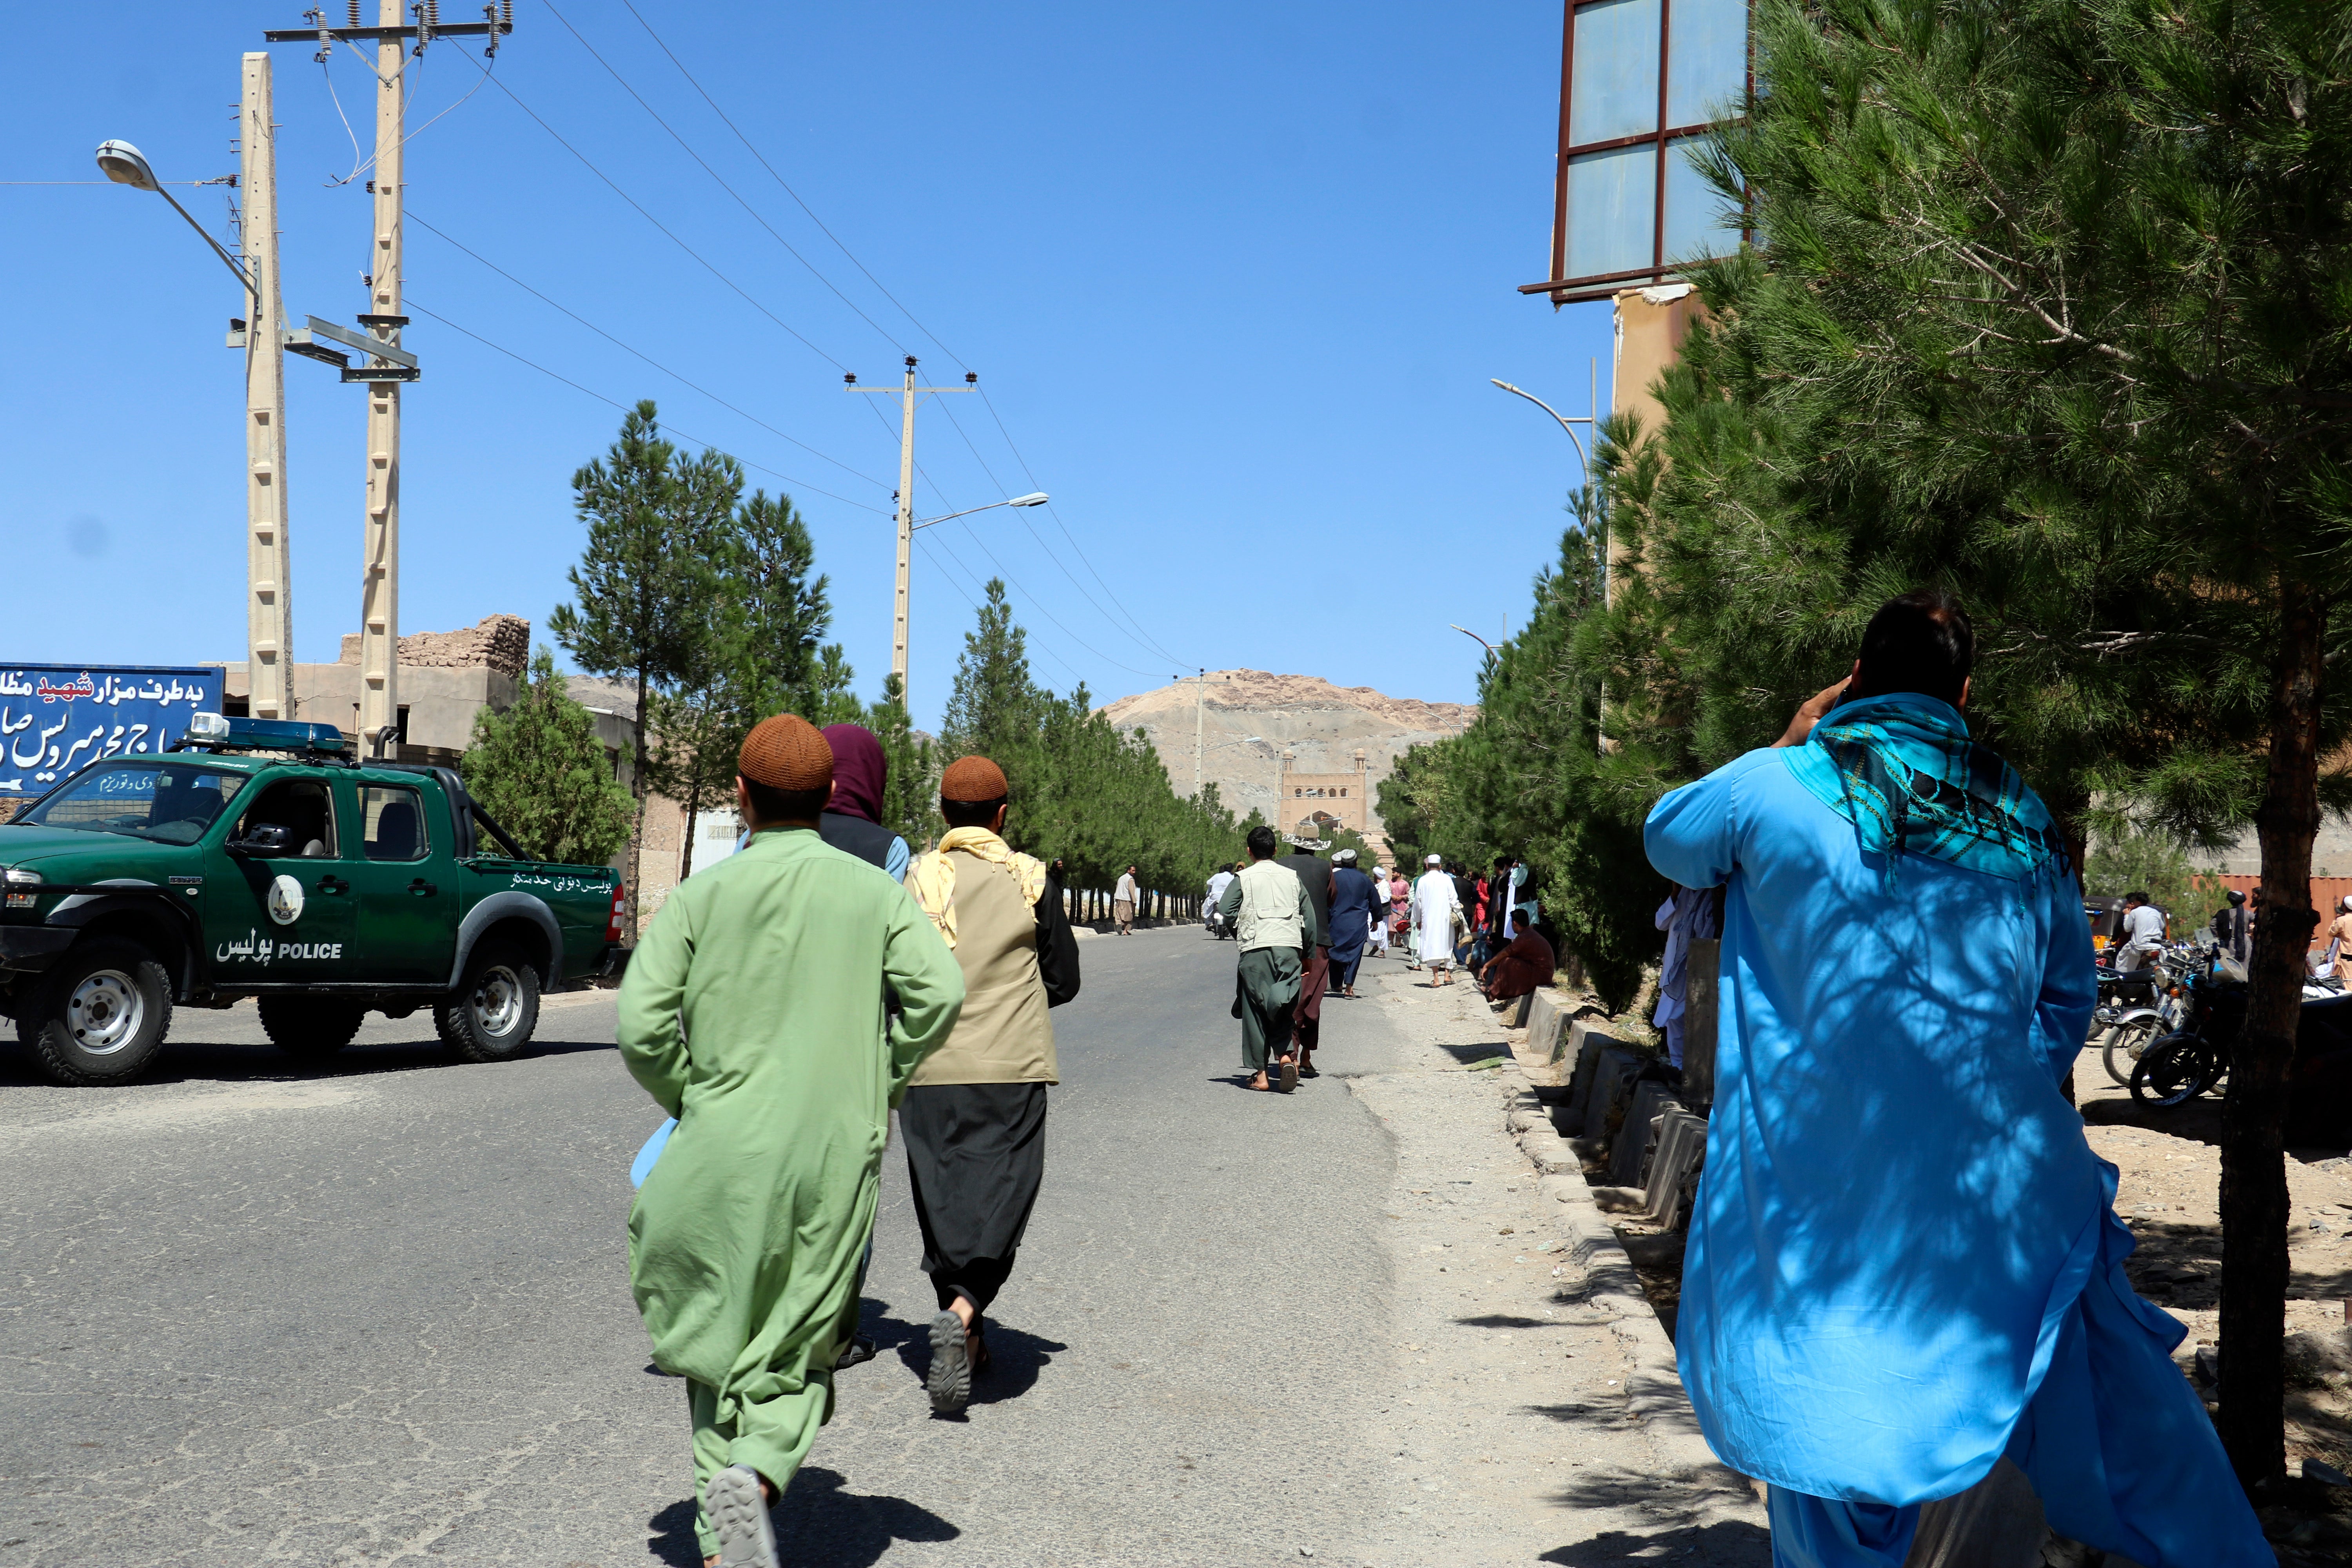 Afghan people run near the site of an explosion in Herat province in Afghanistan